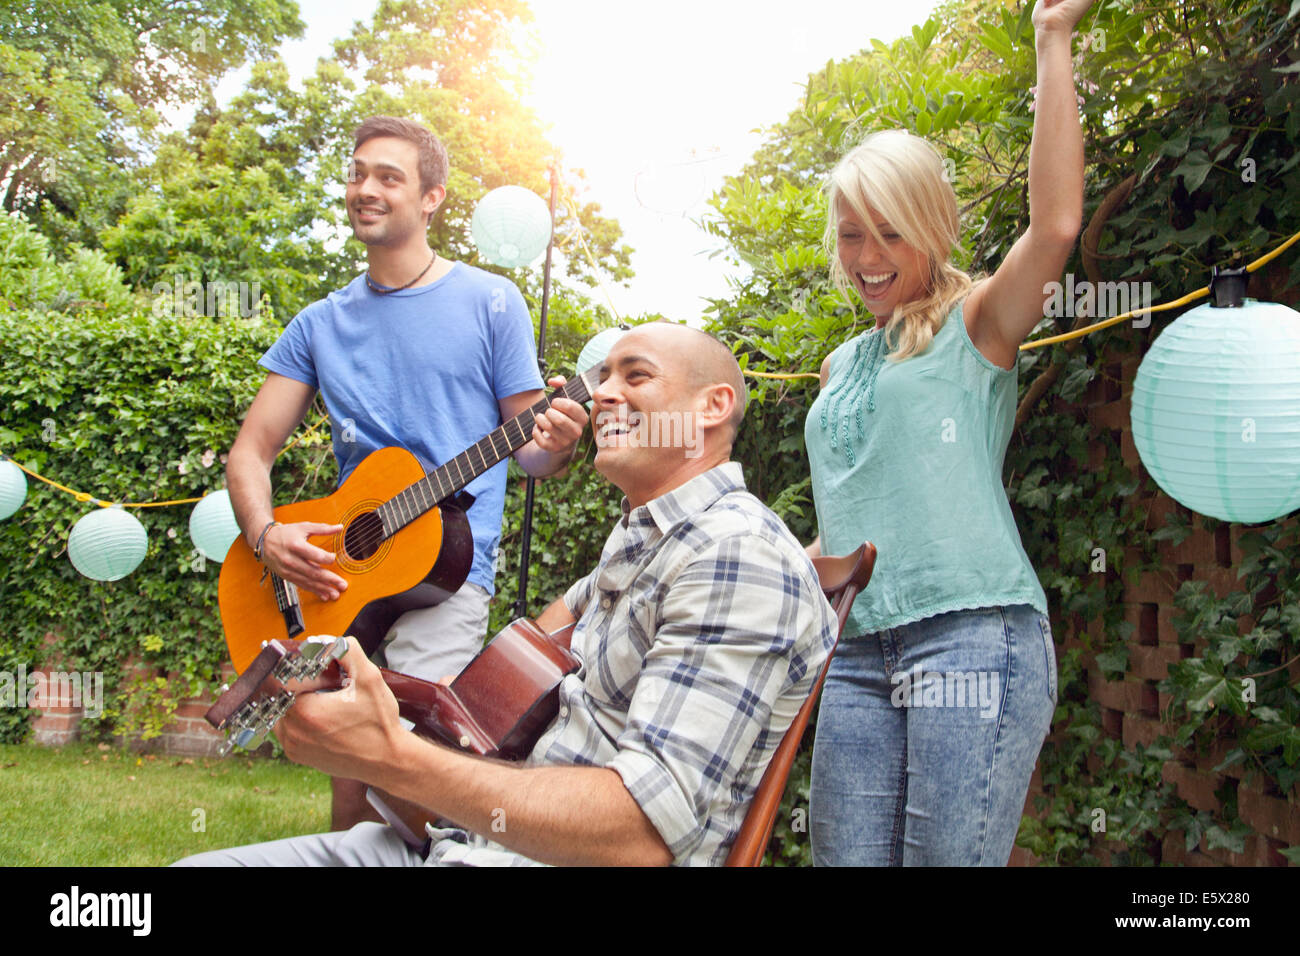 Male friends playing acoustic guitar in garden and young woman dancing Stock Photo